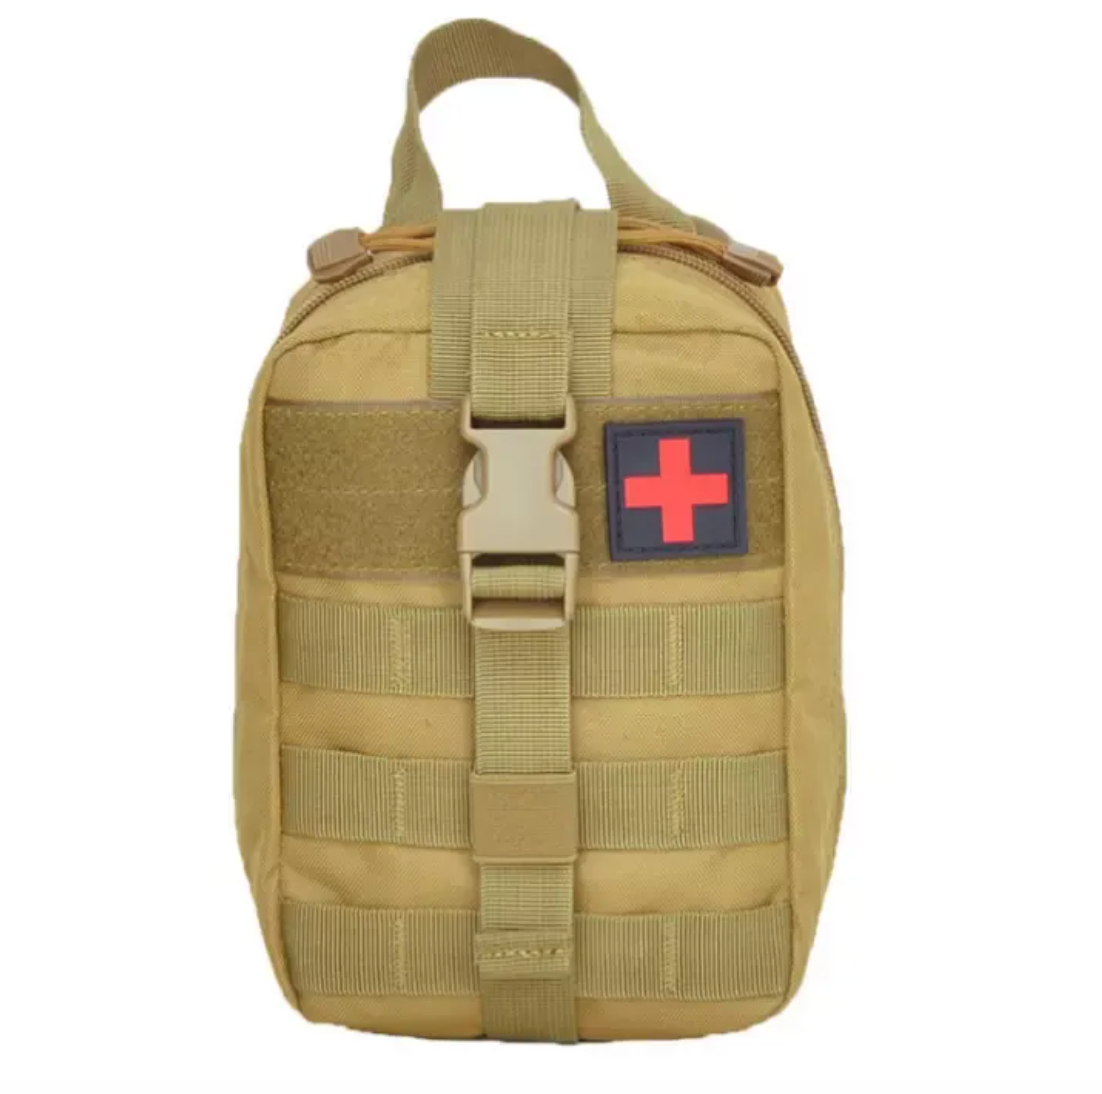 Tactical Medical Accessory Bag with Patch - Khaki/Mud - RPI Supplies